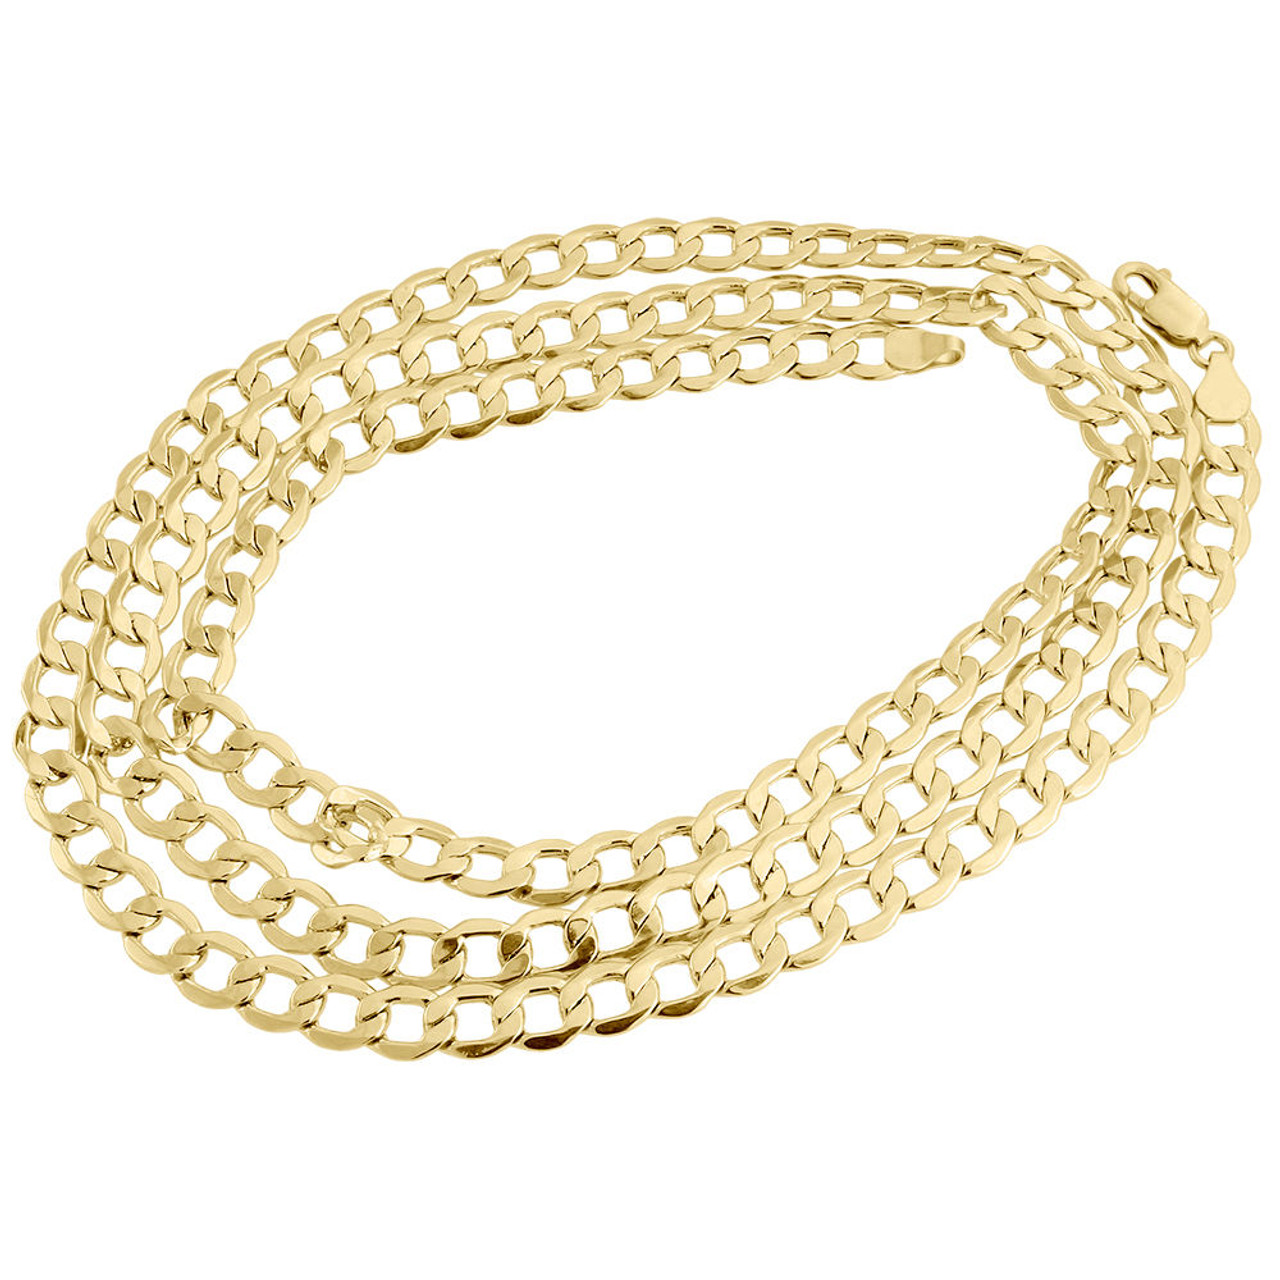 10K Yellow Gold 6.50mm Hollow Plain Cuban Curb Link Chain Necklace 16-30 Inches